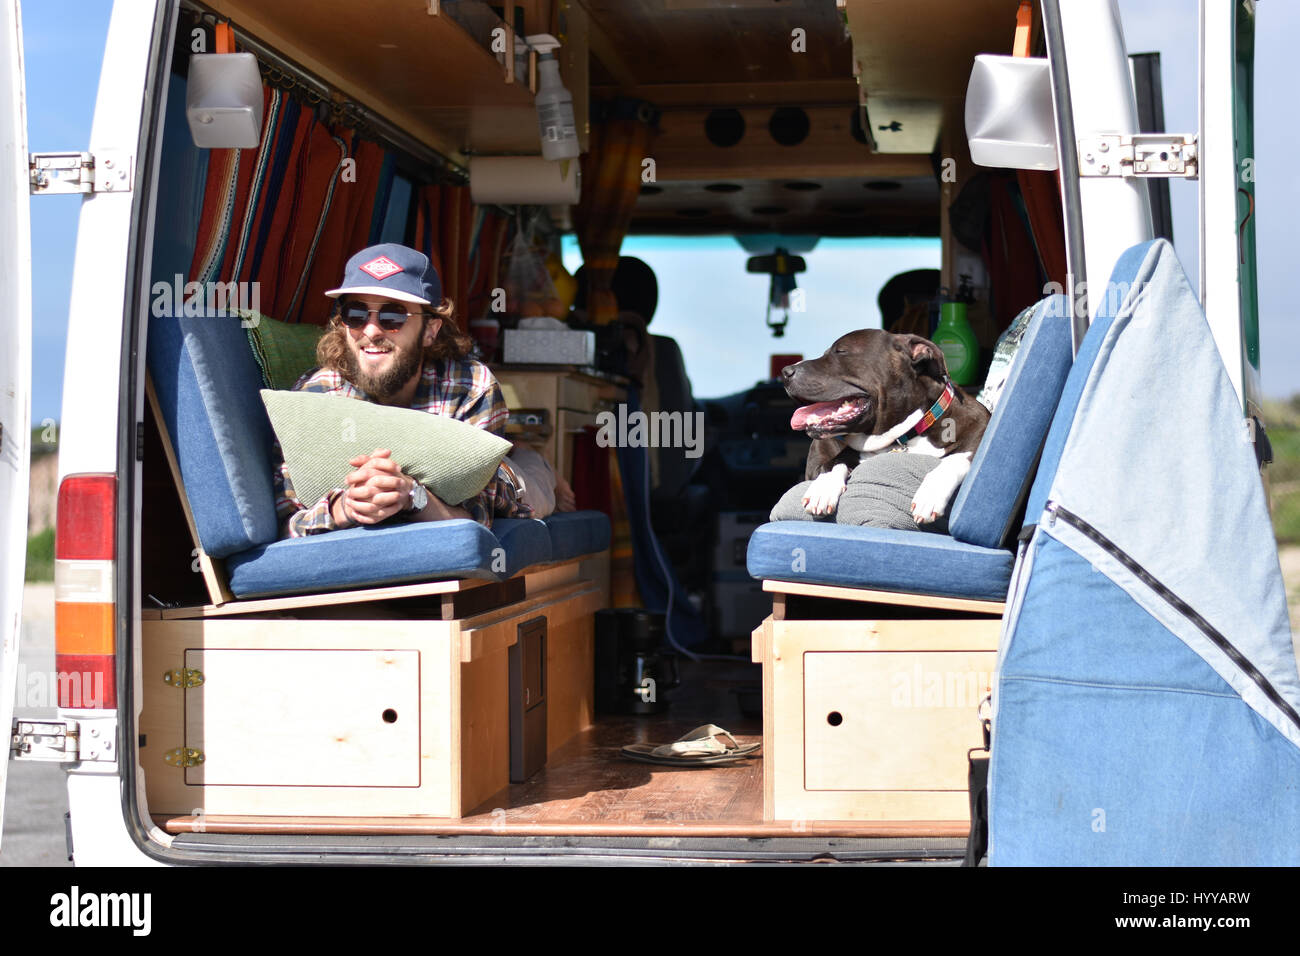 MEET the couple who shunned traditional office jobs and spent $5,000 converting their Dodge Sprinter van into a home to live life on the road with their beloved pet dog. The series of envy inducing pictures and video show Pete Thuli (24) and Taylor Bucher (23) also known as Always the Road from Wisconsin, USA enjoying life on the road as they travel around the states of America with their American Staffordshire Terrier, Snoop. Other shots show how the couple worked for four months whilst both holding down full time jobs to refurbish the van’s shell into a fully functional home complete with ki Stock Photo